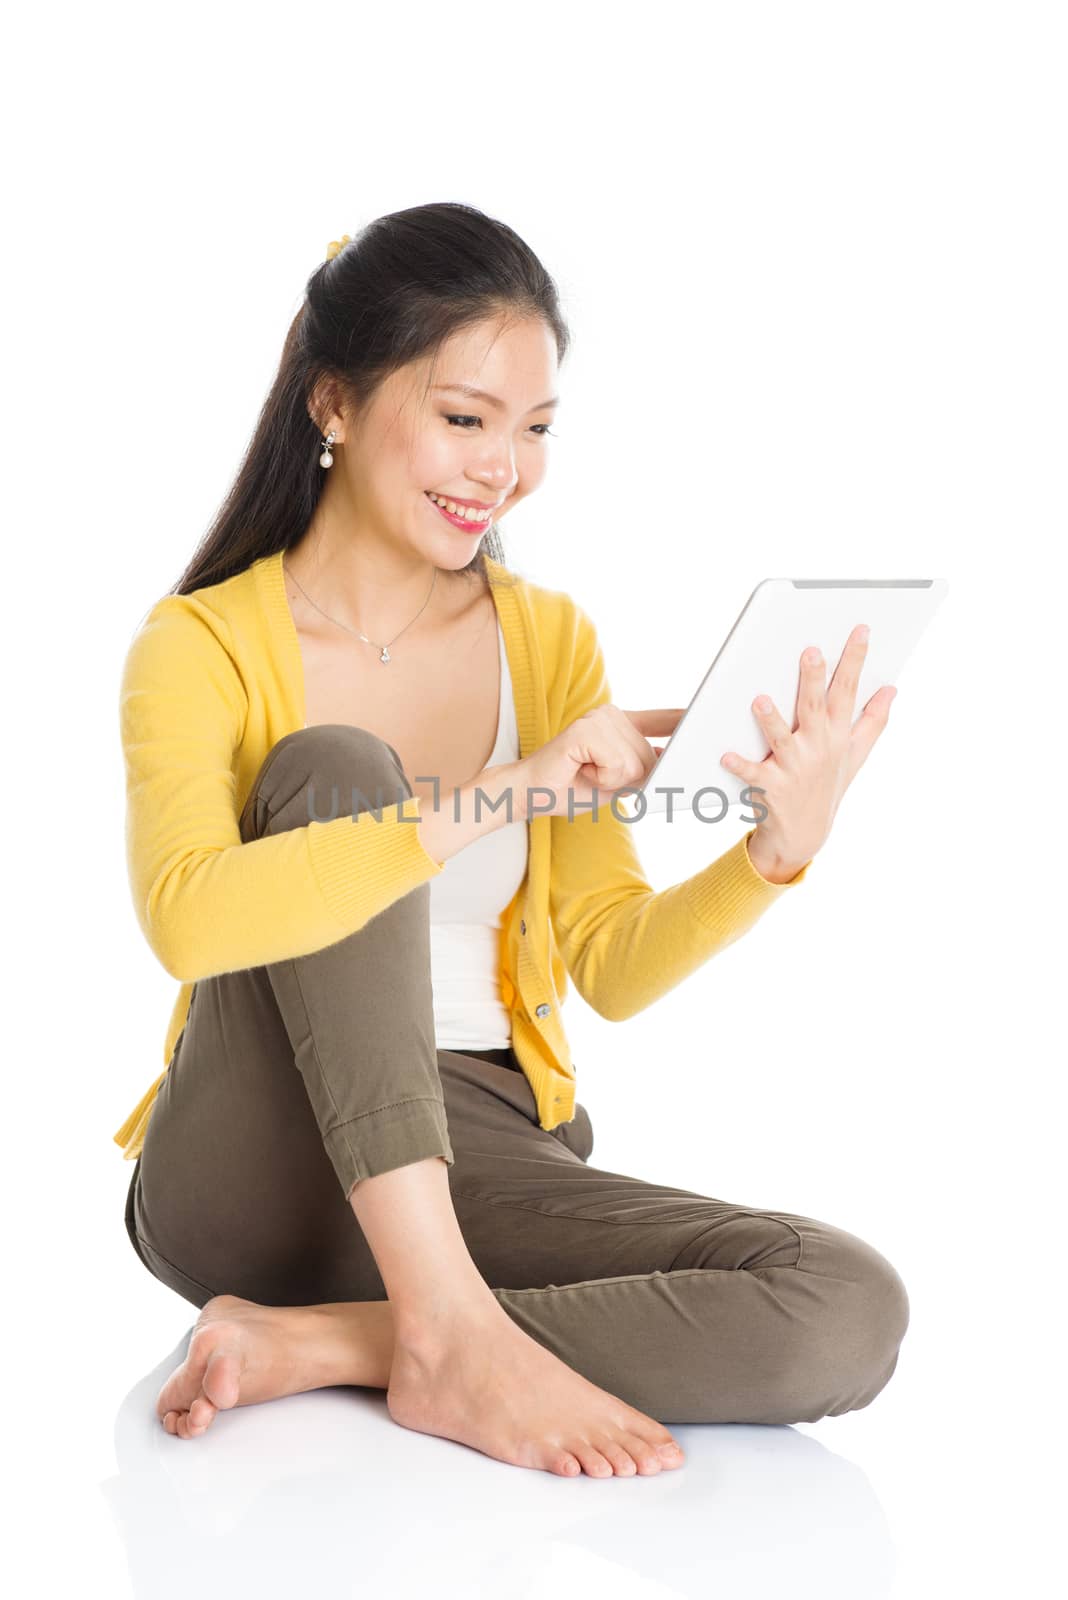 Full length portrait of casual Asian girl sitting on floor smiling and using touch screen tablet pc, isolated on white background.